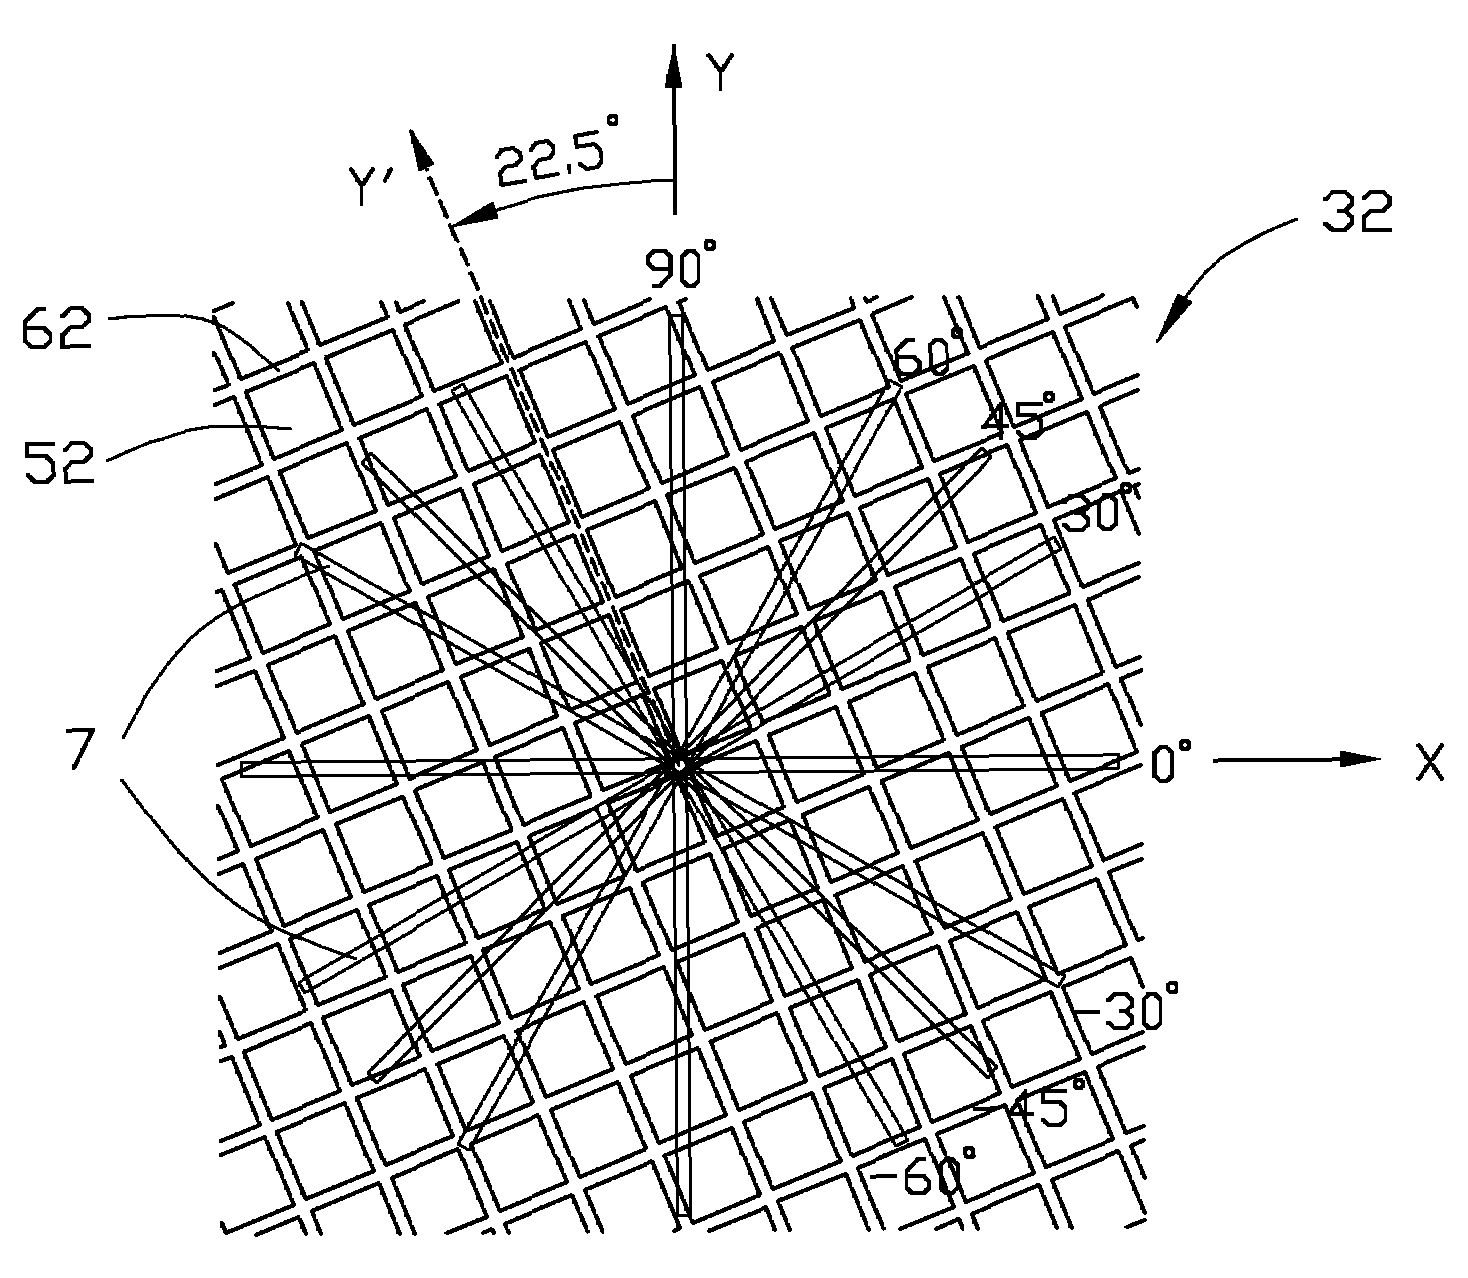 Circuit board with improved ground plane